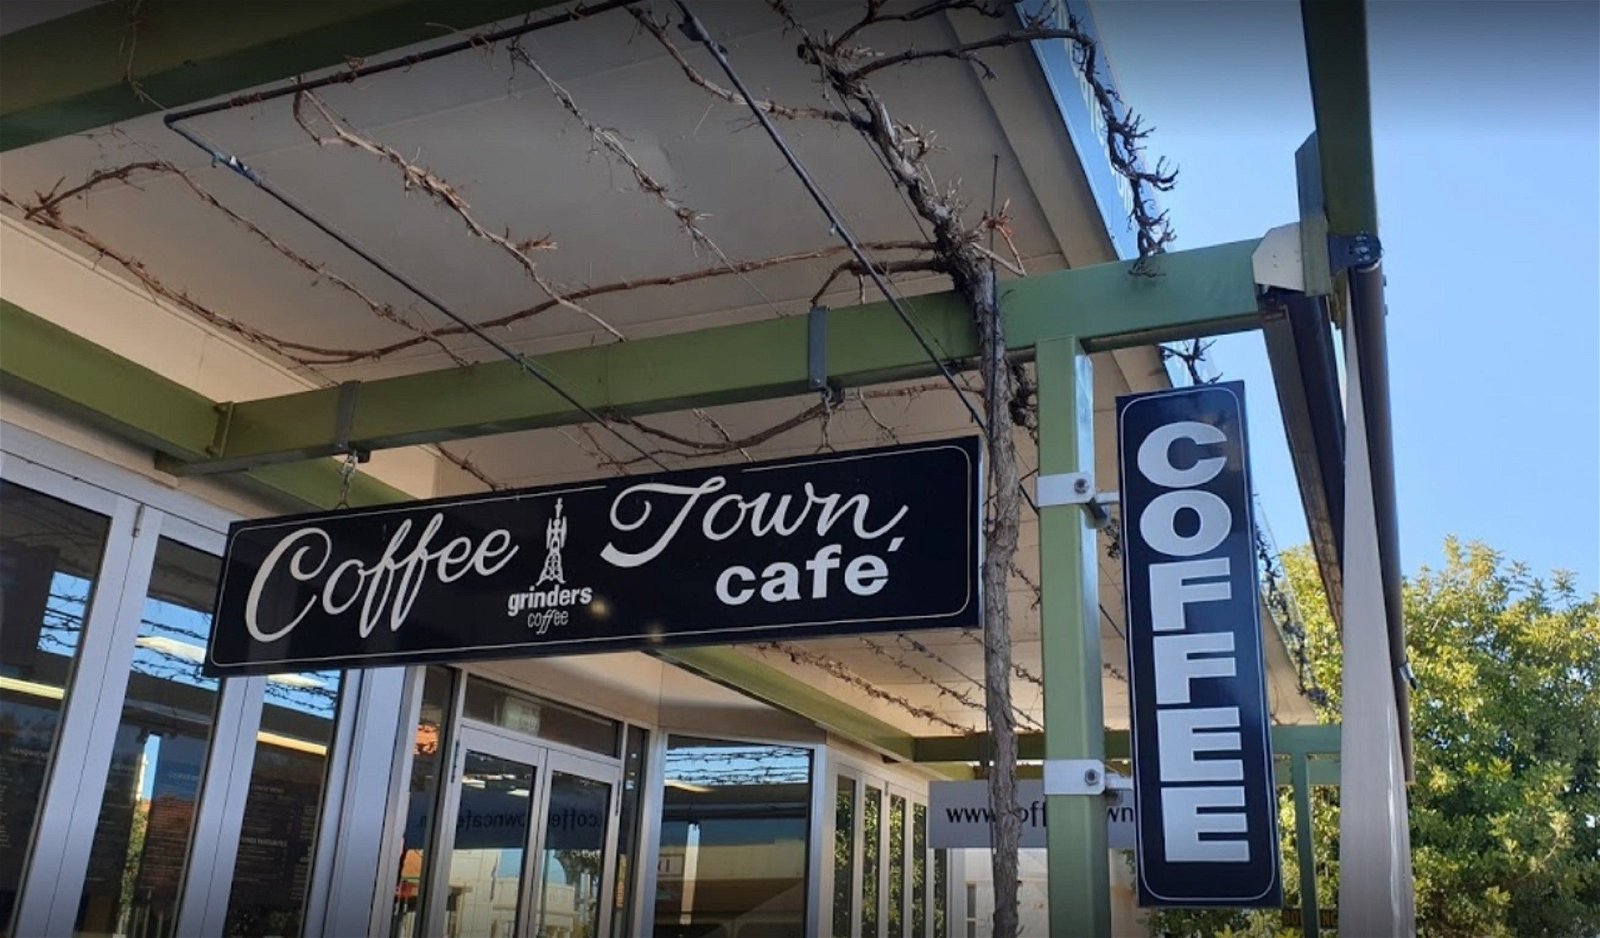 Coffee Town Cafe - Pubs Sydney